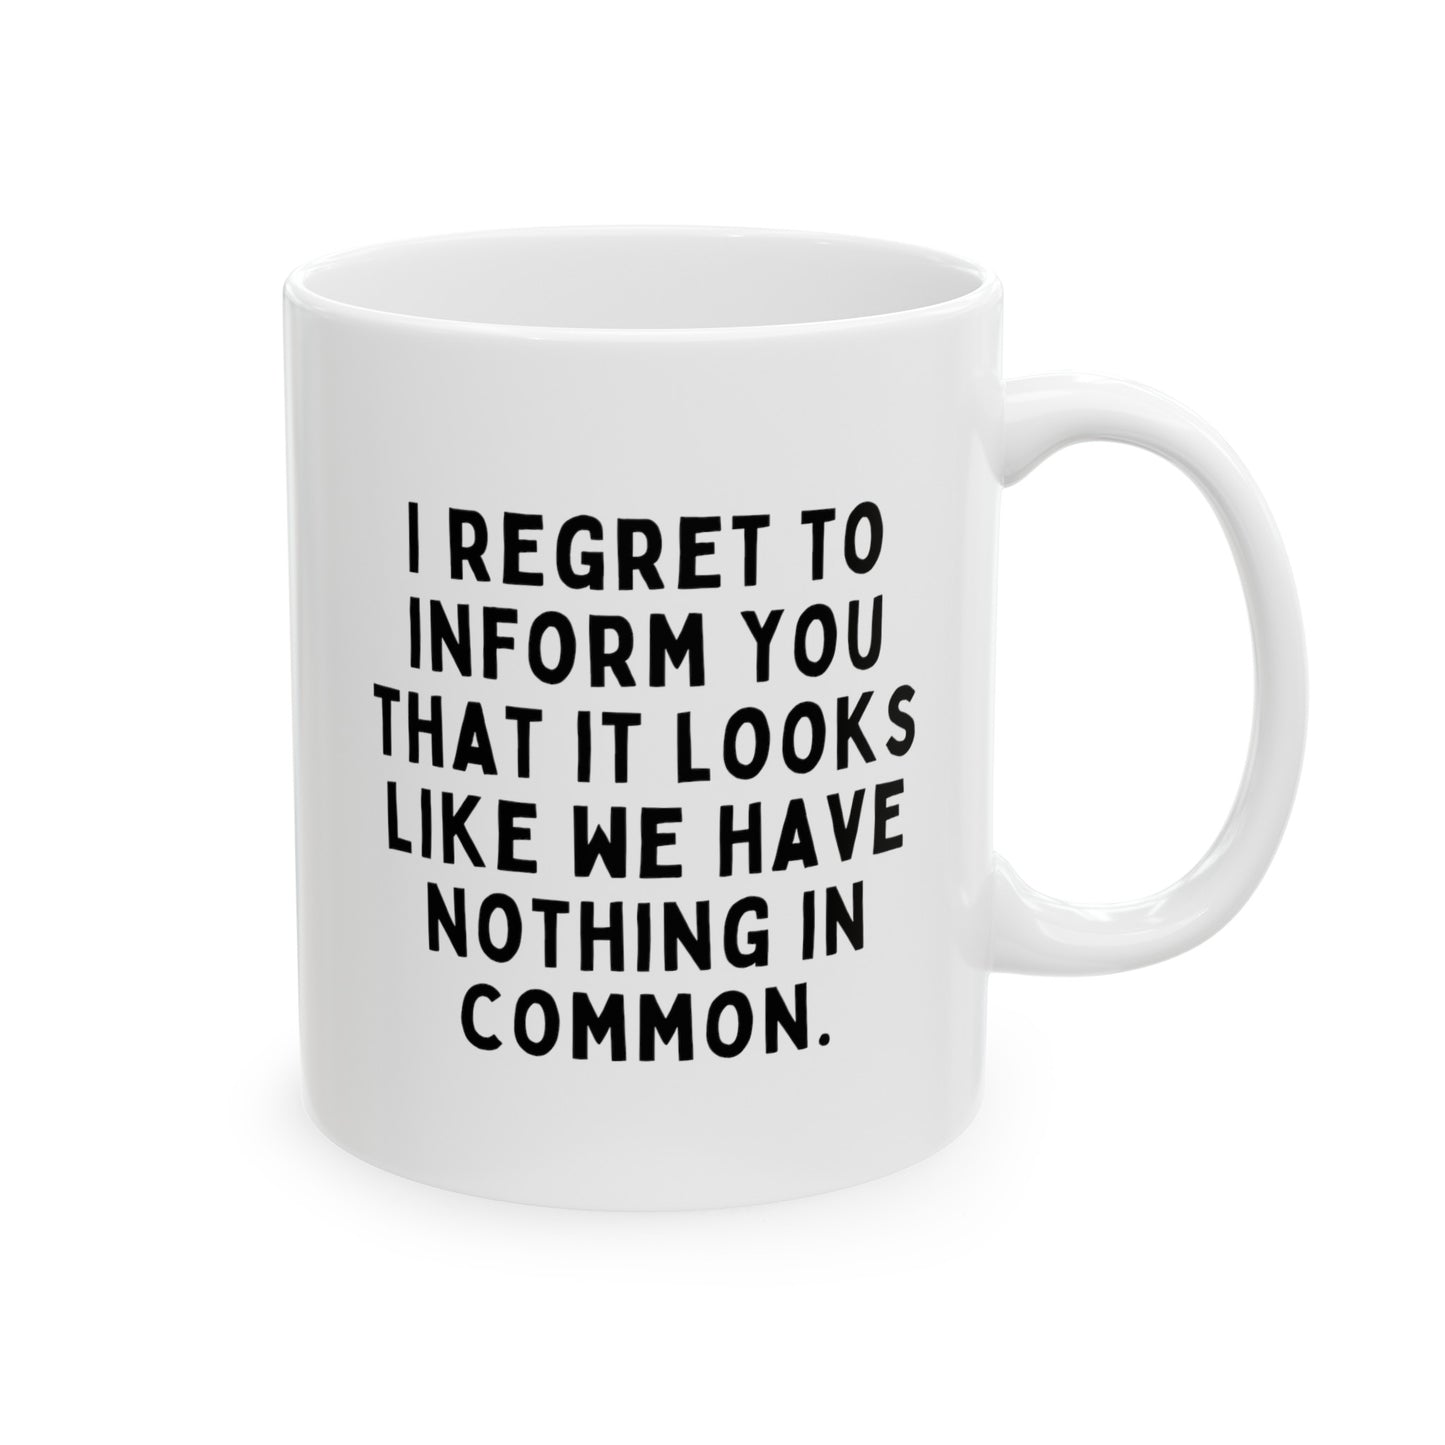 I Regret To Inform You That It Looks Like We Have Nothing In Common 11oz white funny large coffee mug gift for coworker best friend sarcastic sarcasm secret santa colleague waveywares wavey wares wavywares wavy wares